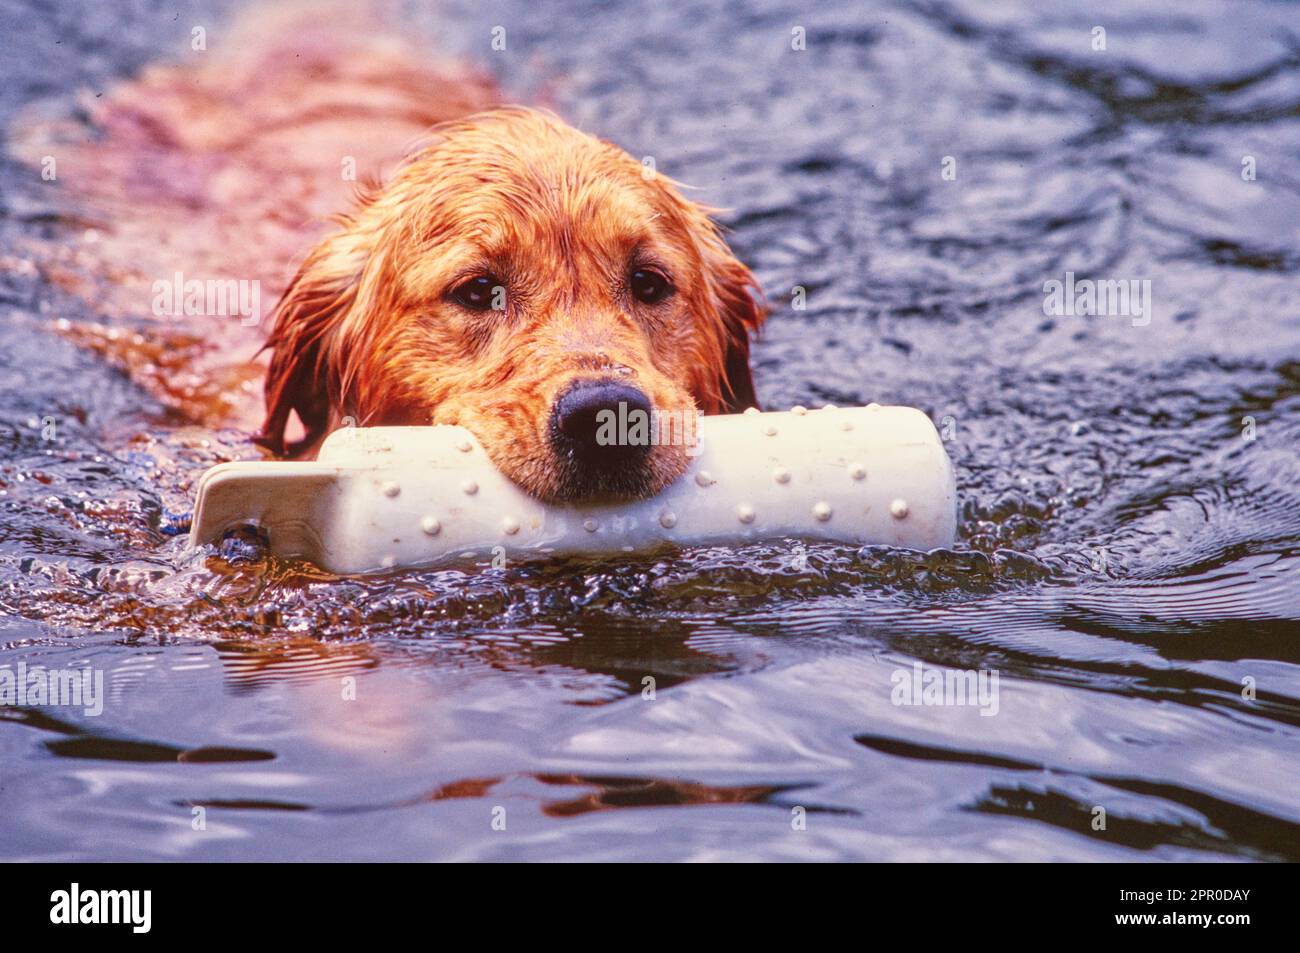 Golden retriever holding floating toy in mouth while swimming in water Stock Photo